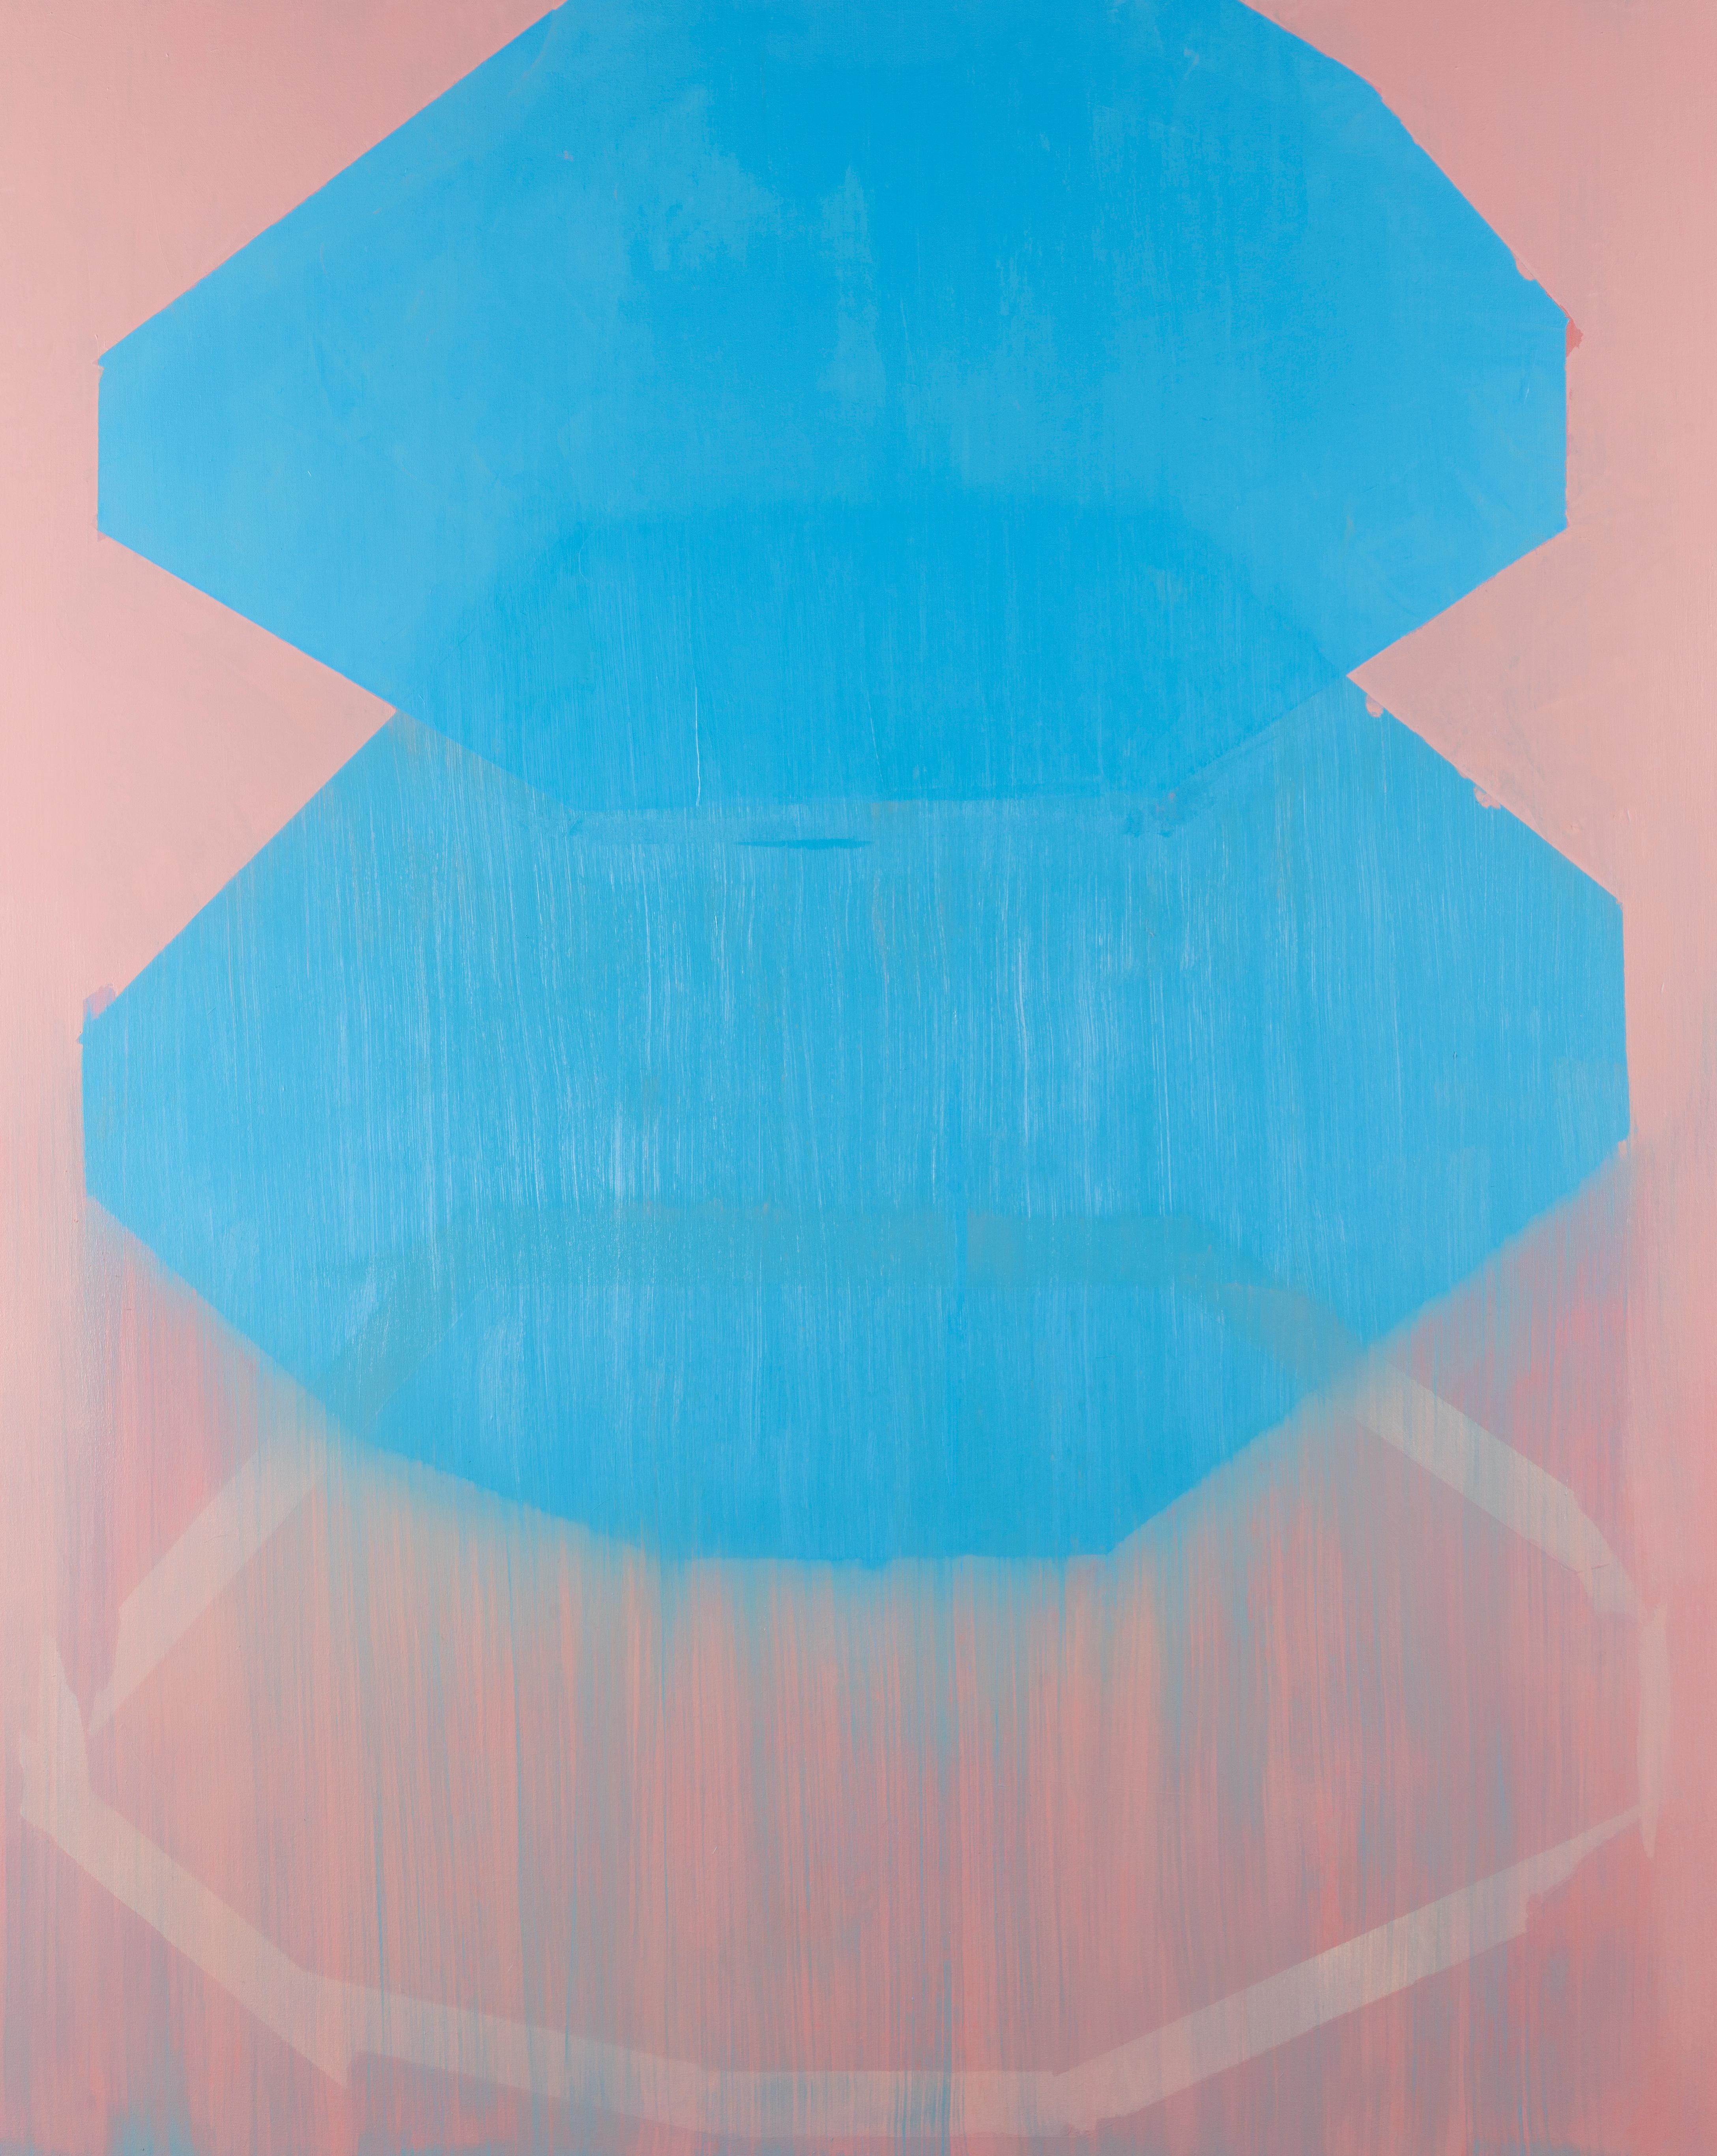 Liz Rundorff Smith Abstract Painting - Cotton Candy, pink and blue abstract oil painting on canvas